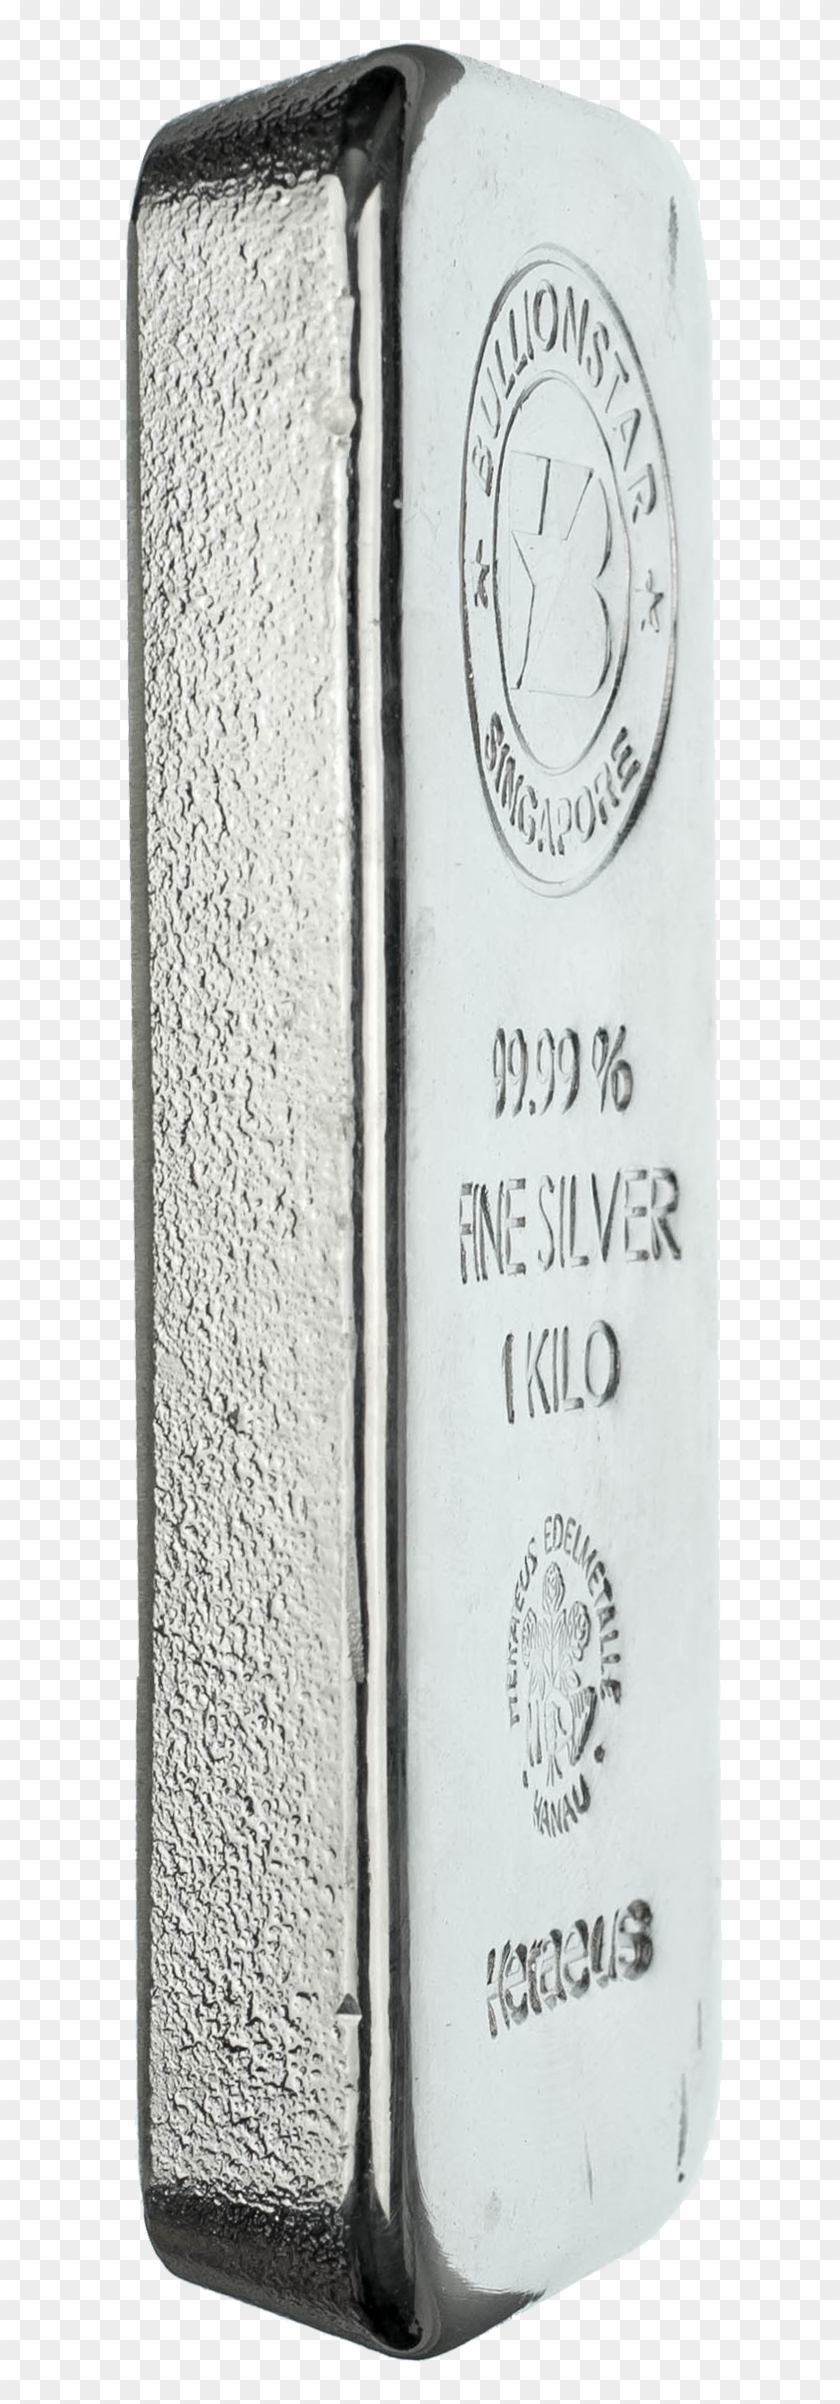 The Bullionstar Silver Bar Can Be Traded Without Any - German Silver Bar Kilo Clipart #1118670